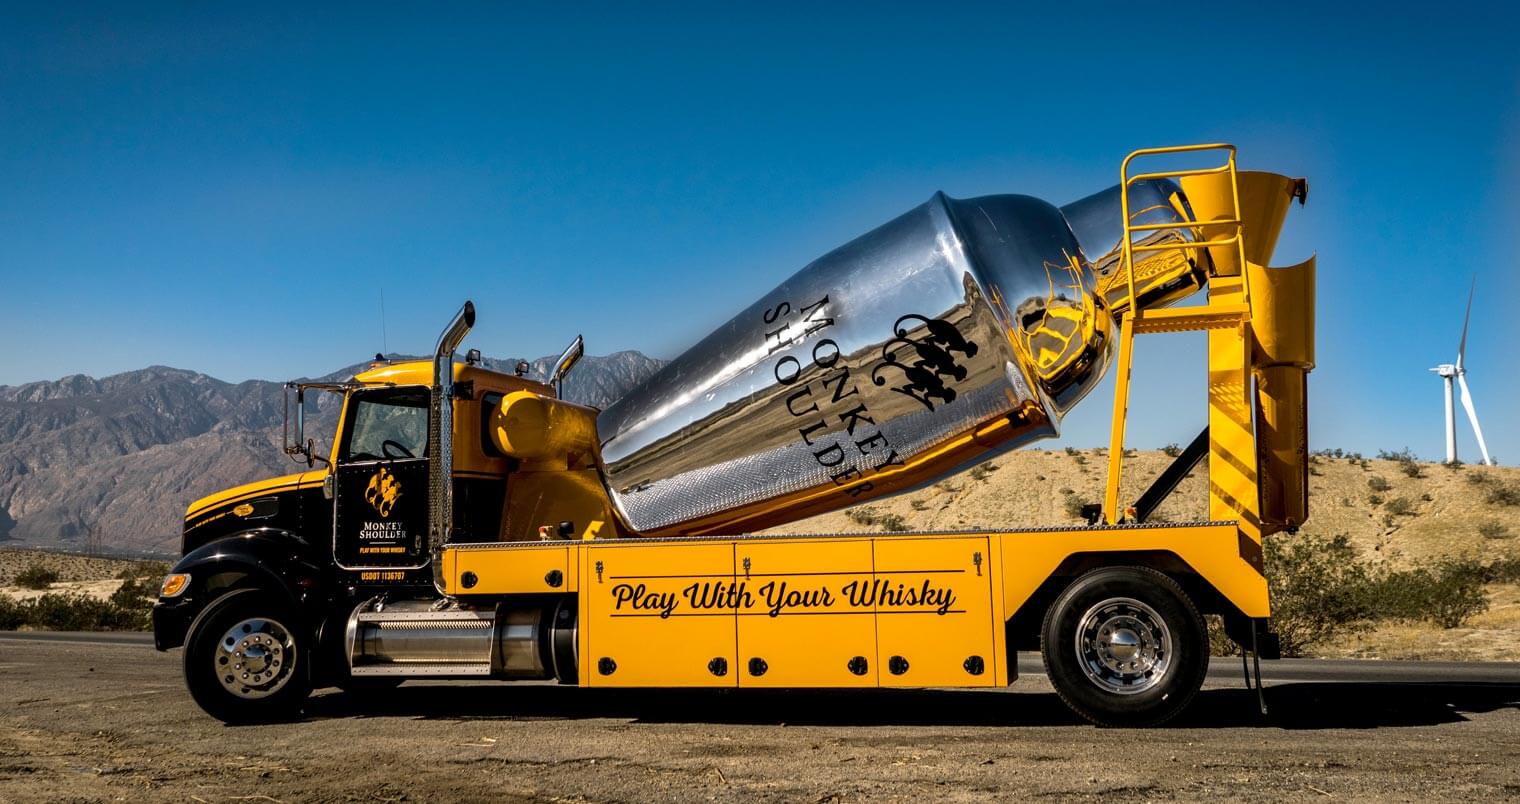 The Monkey Mixer, shaker on transfer truck, featured image